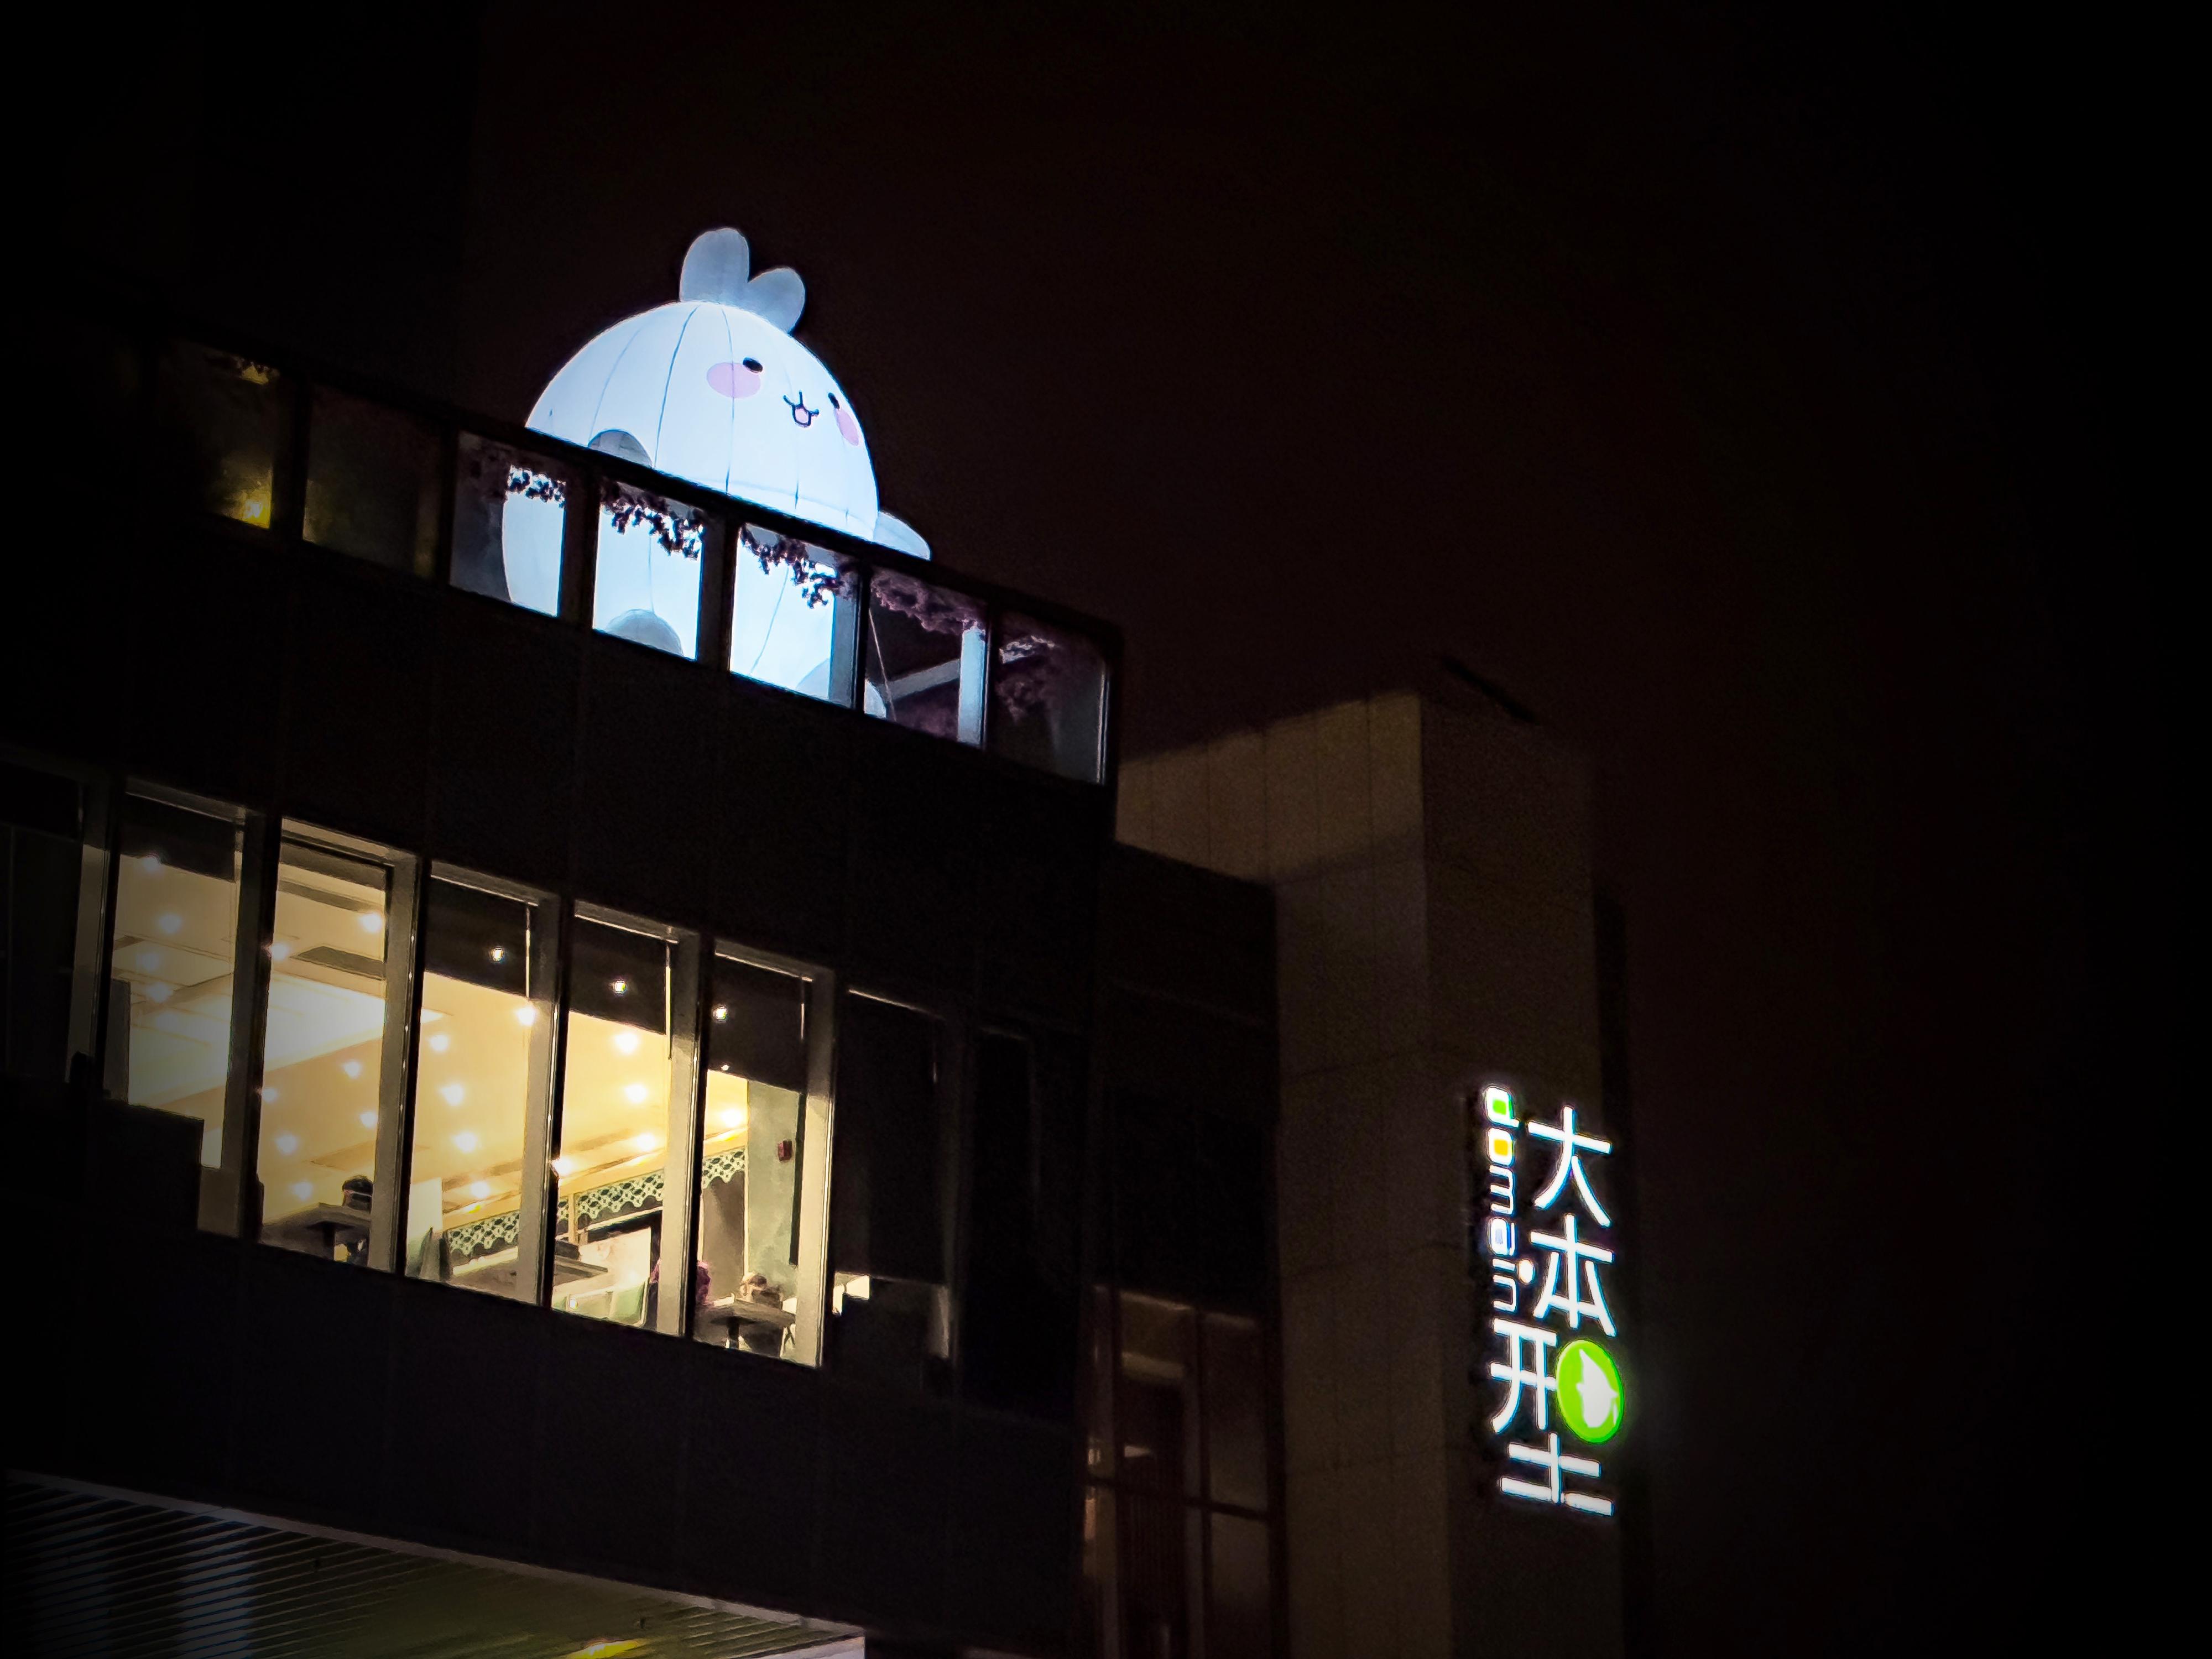 The Hong Kong Housing Authority has put up rabbit decorations at the atrium and the roof garden of Domain, its regional shopping centre in Yau Tong, Kowloon, to welcome the Year of the Rabbit. The glowing giant rabbit at the roof-top garden looks particularly warm and welcoming at night. 